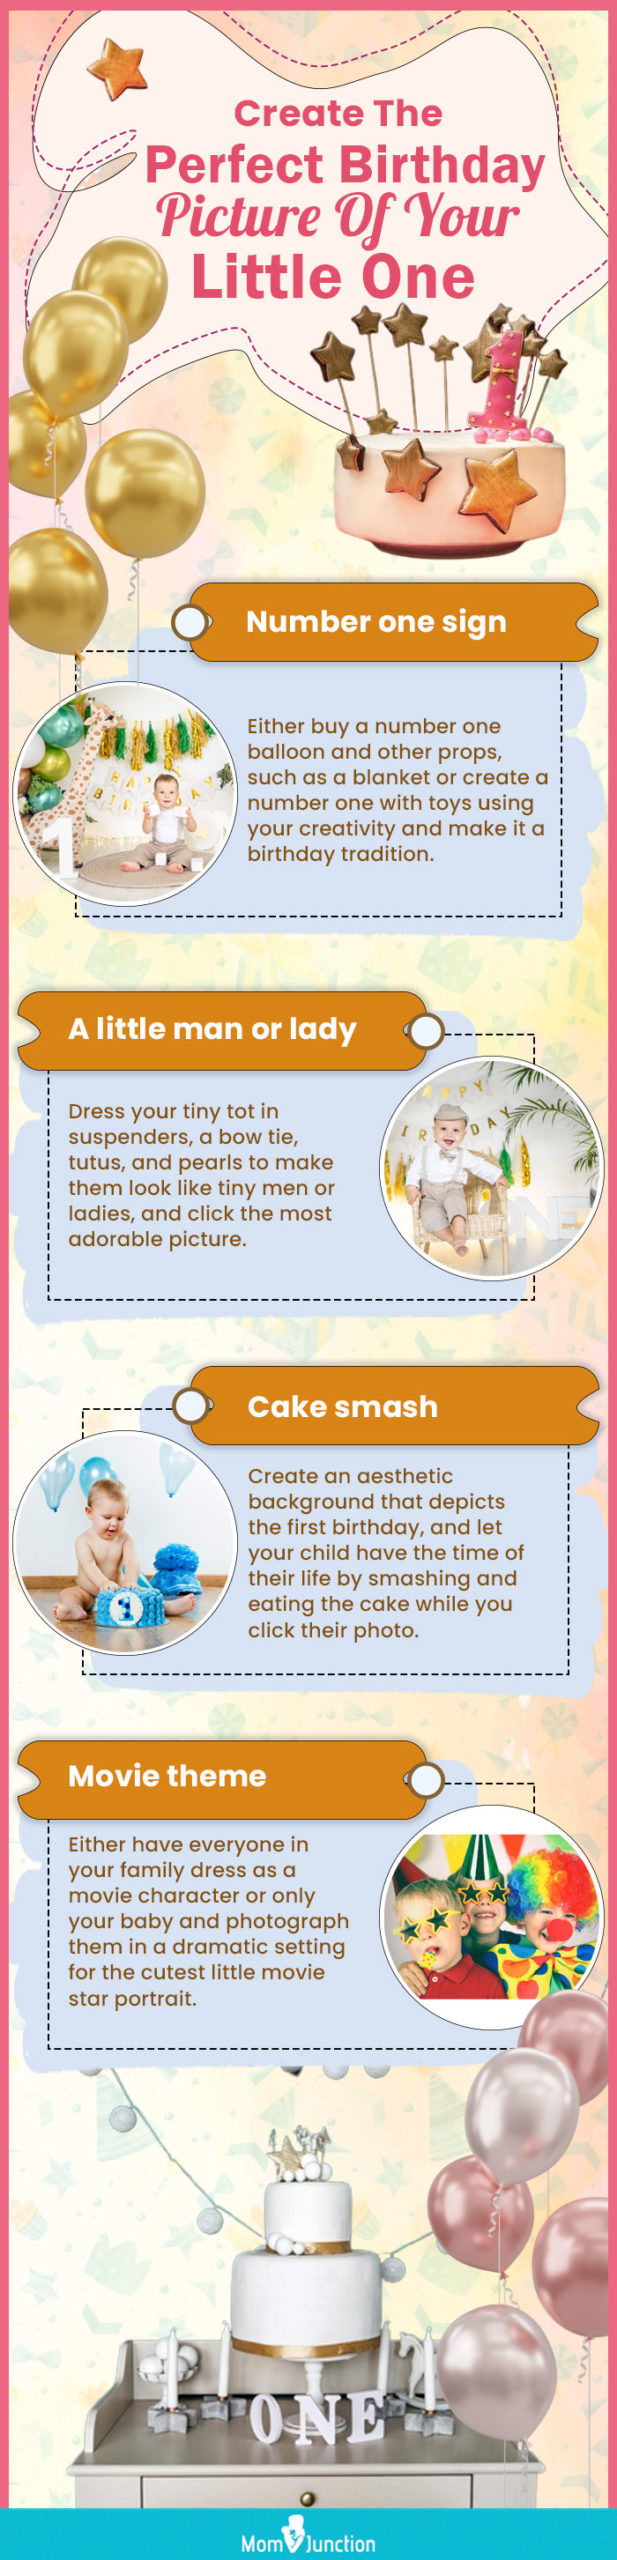 create the perfect birthday picture of your little [infographic]